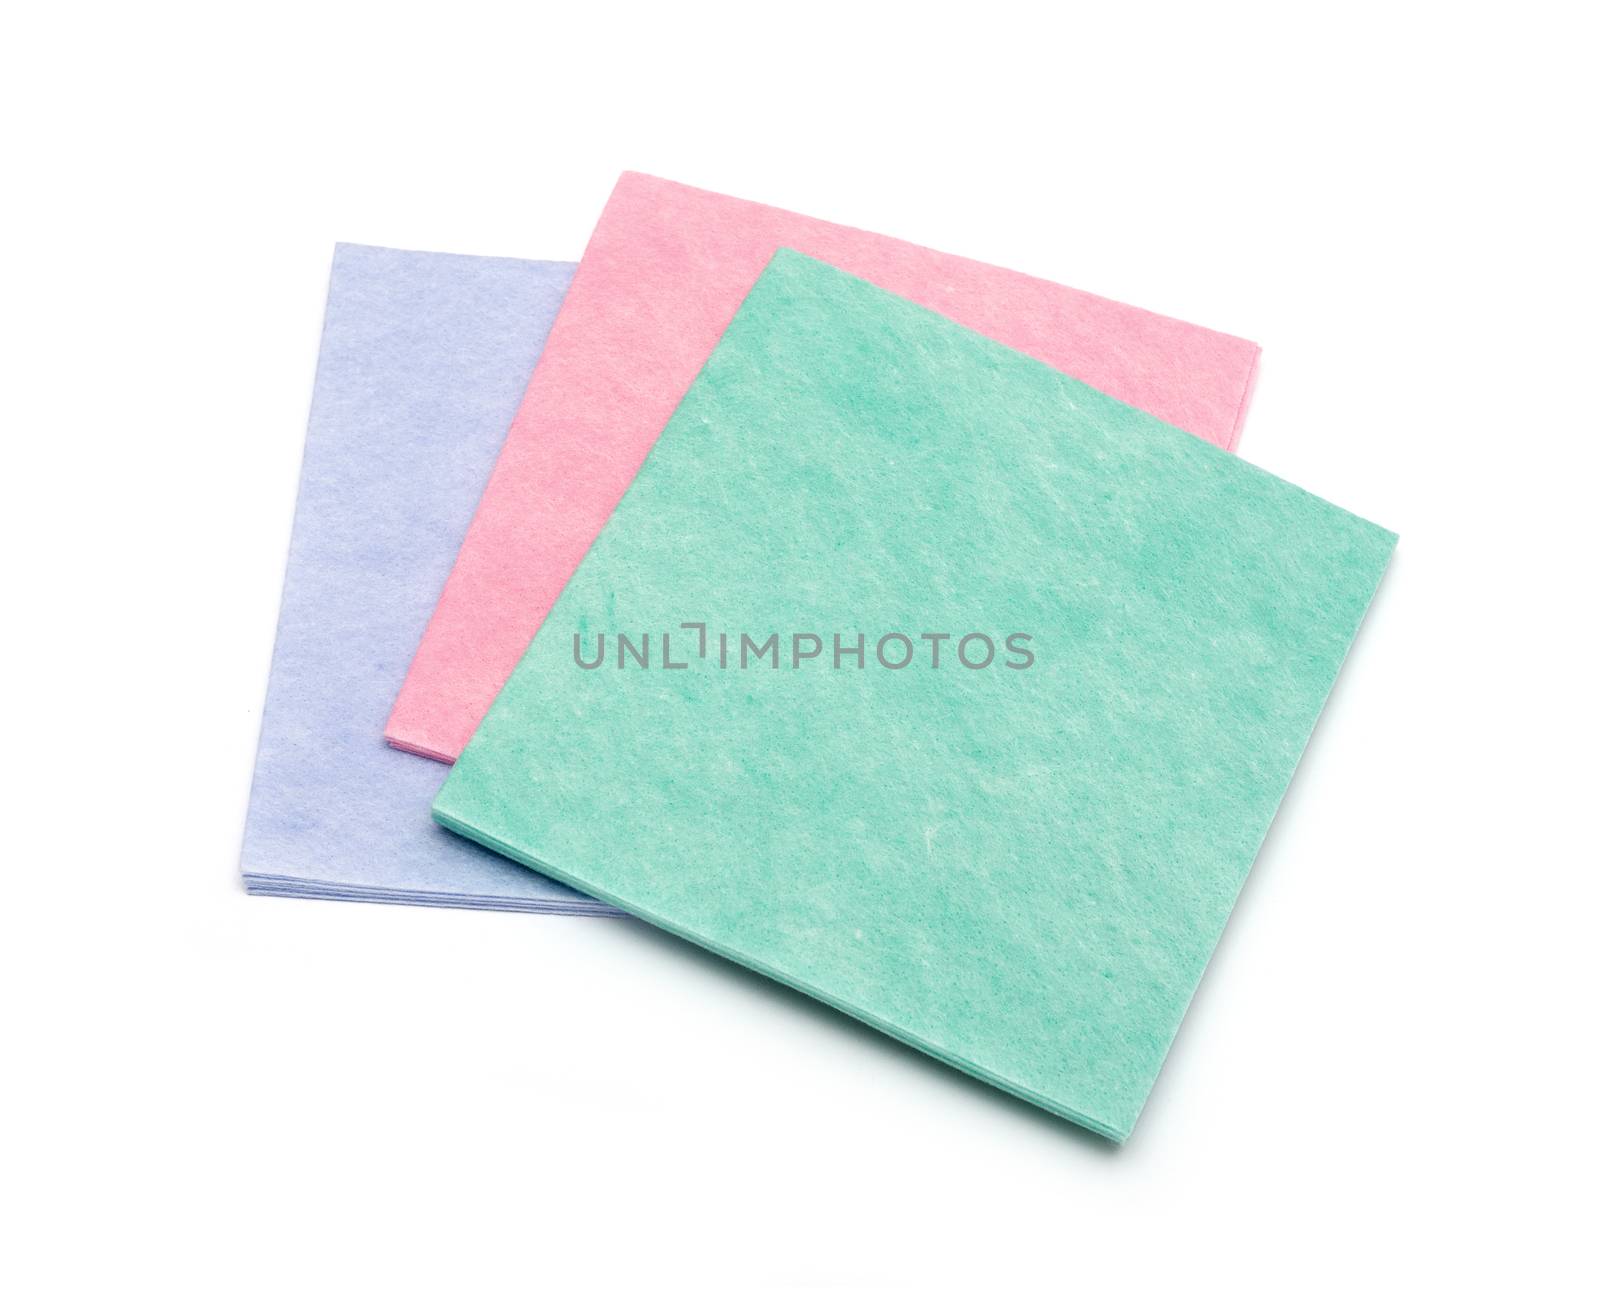 A stack of fabric napkins for household isolated on white by DNKSTUDIO